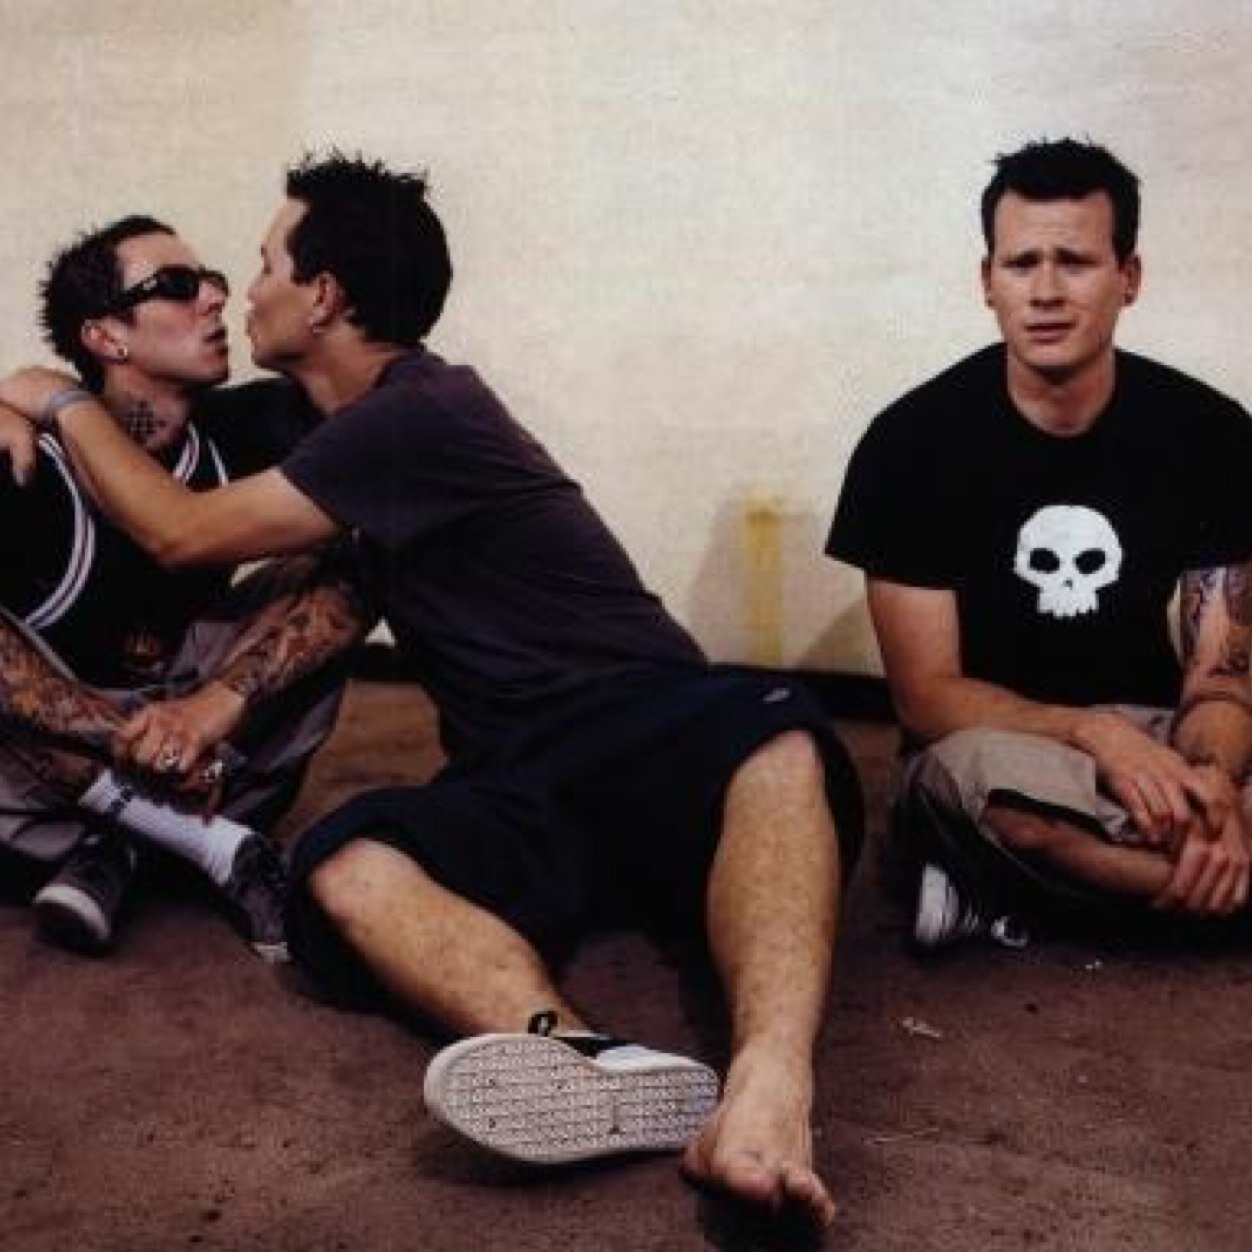 Twitteraccount for blink-182 fans. Follow for lyrics and news about the best band in the world! #182family